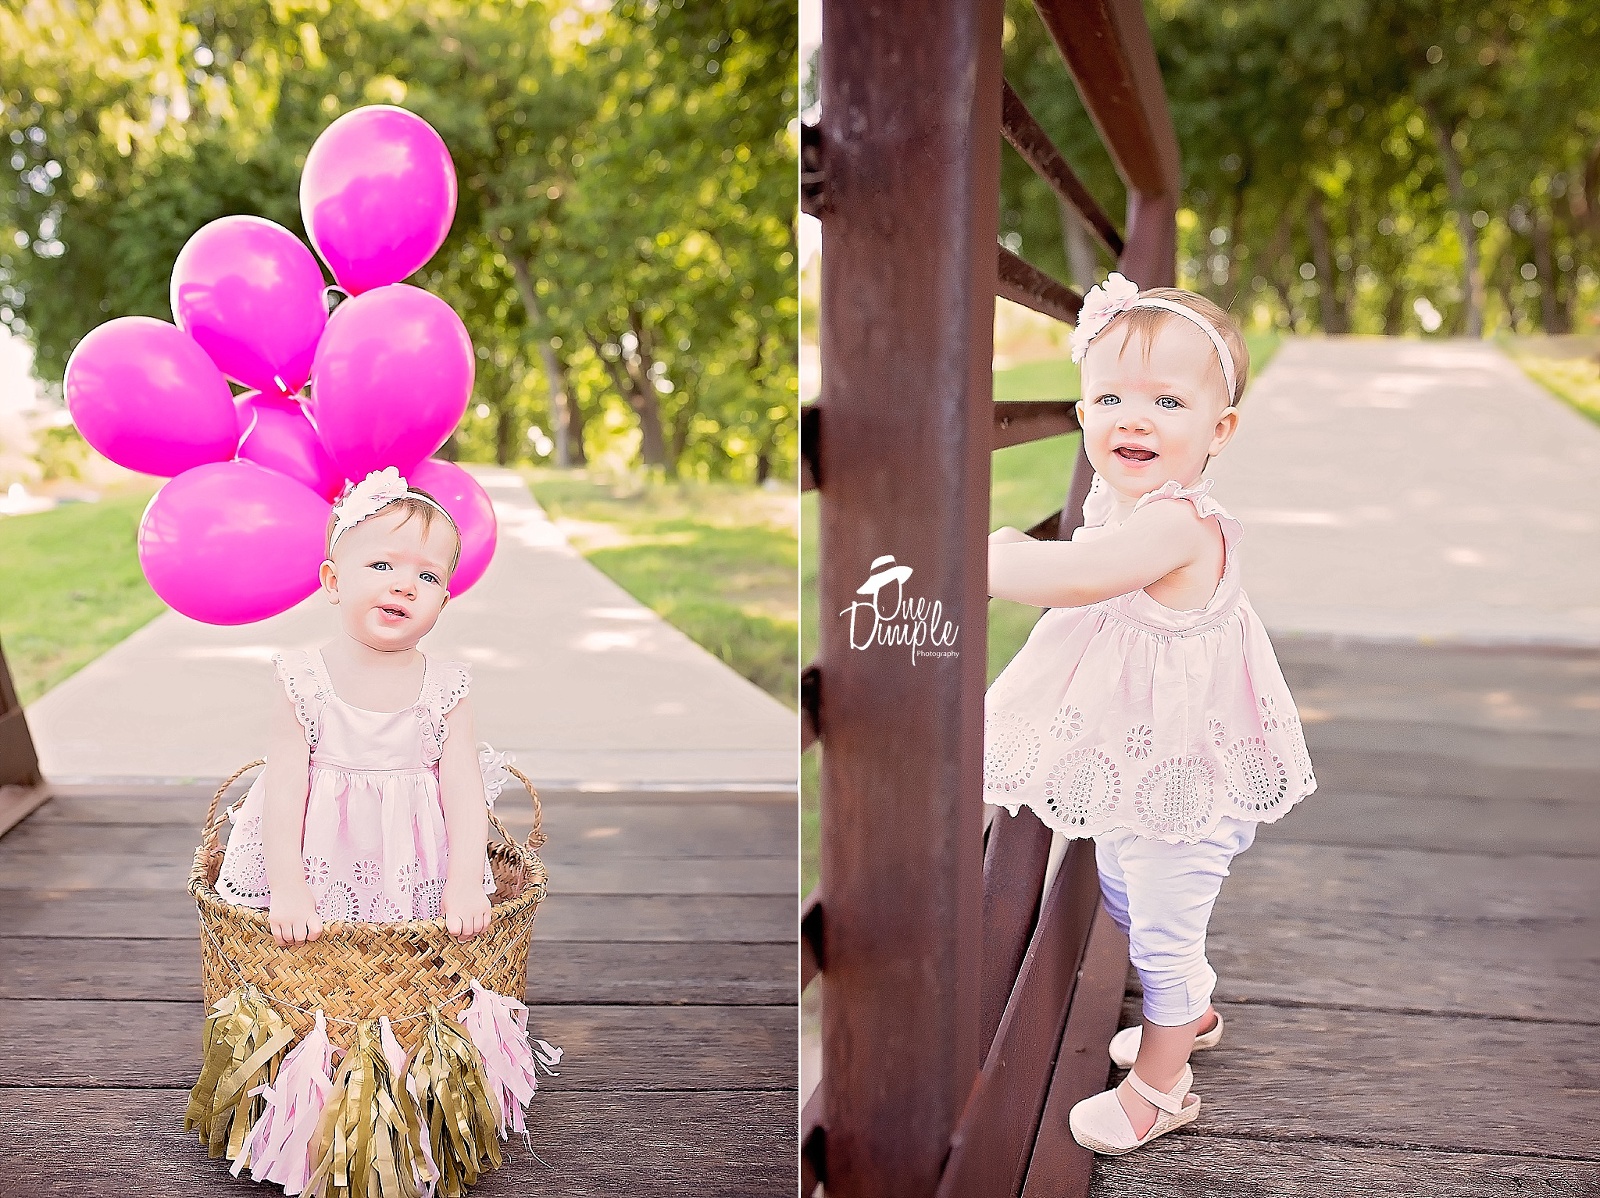 1 year old with balloons and bridge